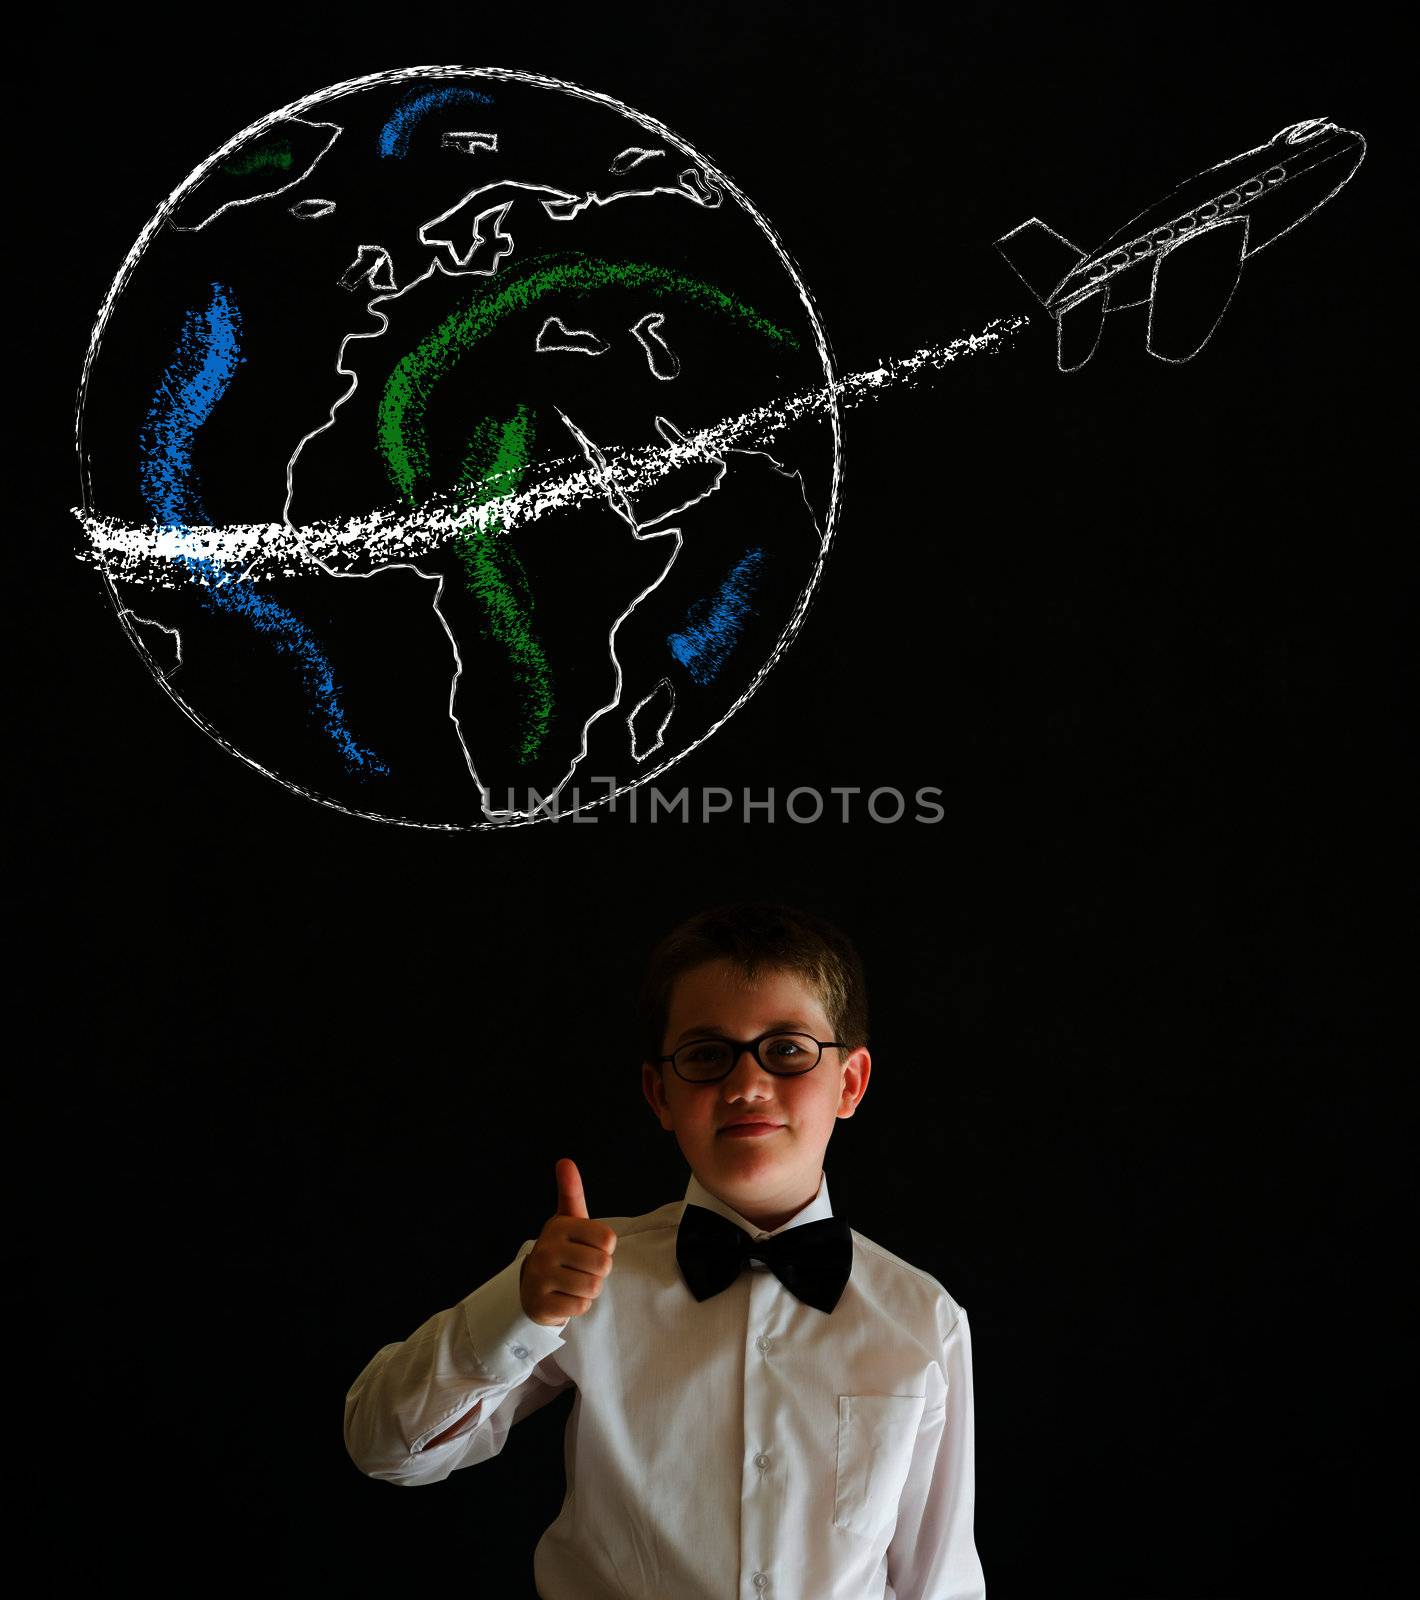 Thumbs up boy dressed up as business man with chalk globe and jet world travel on blackboard background